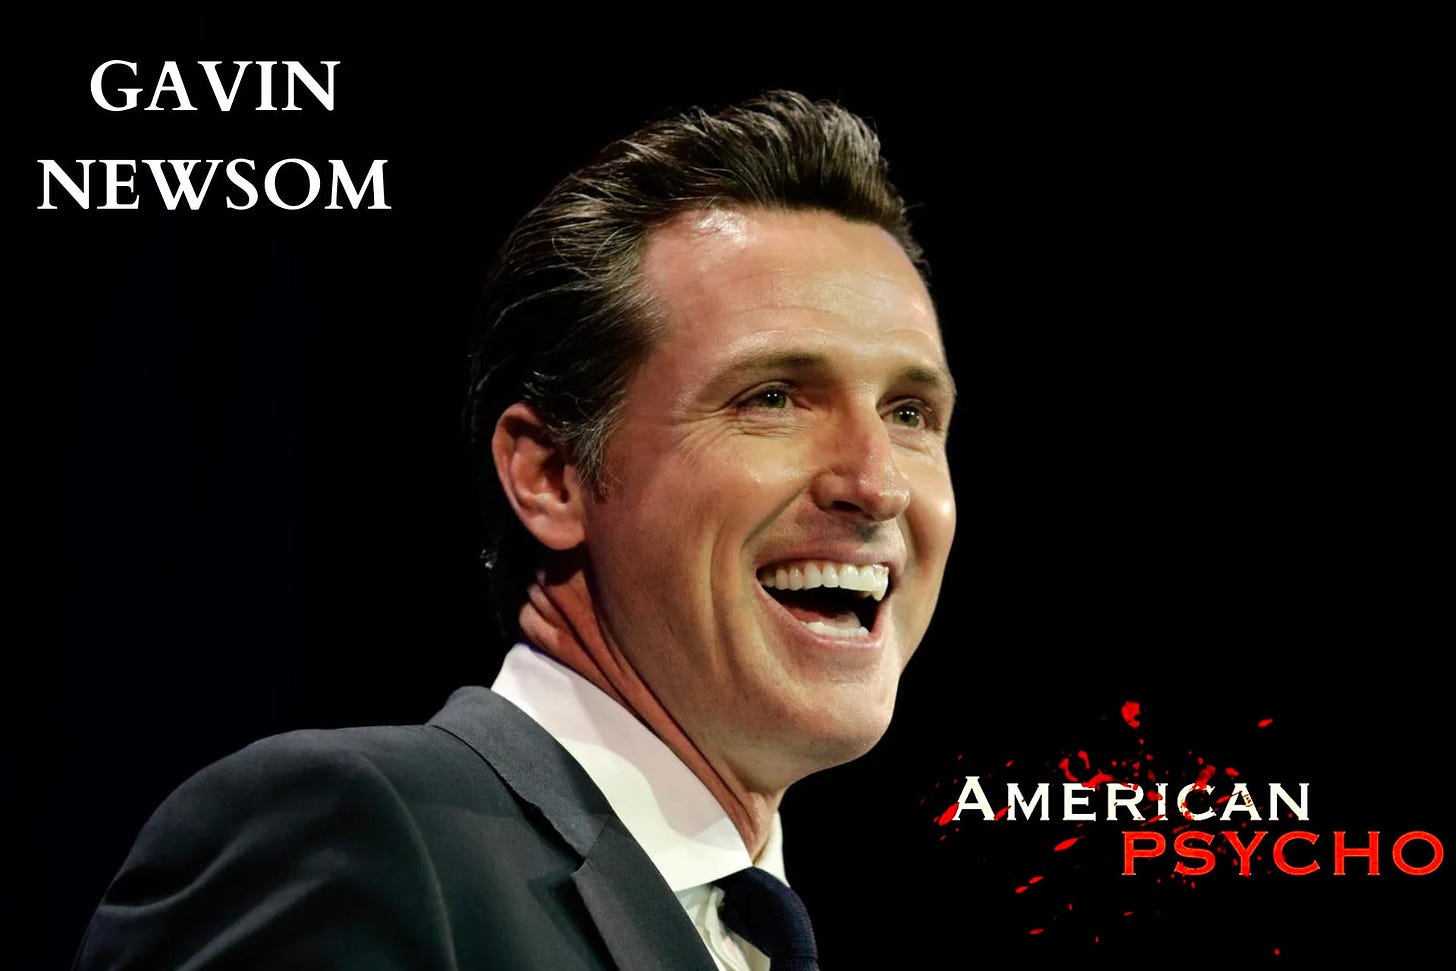 GAVIN NEWSOM the True American Psycho. Rules for Thee but - Etsy